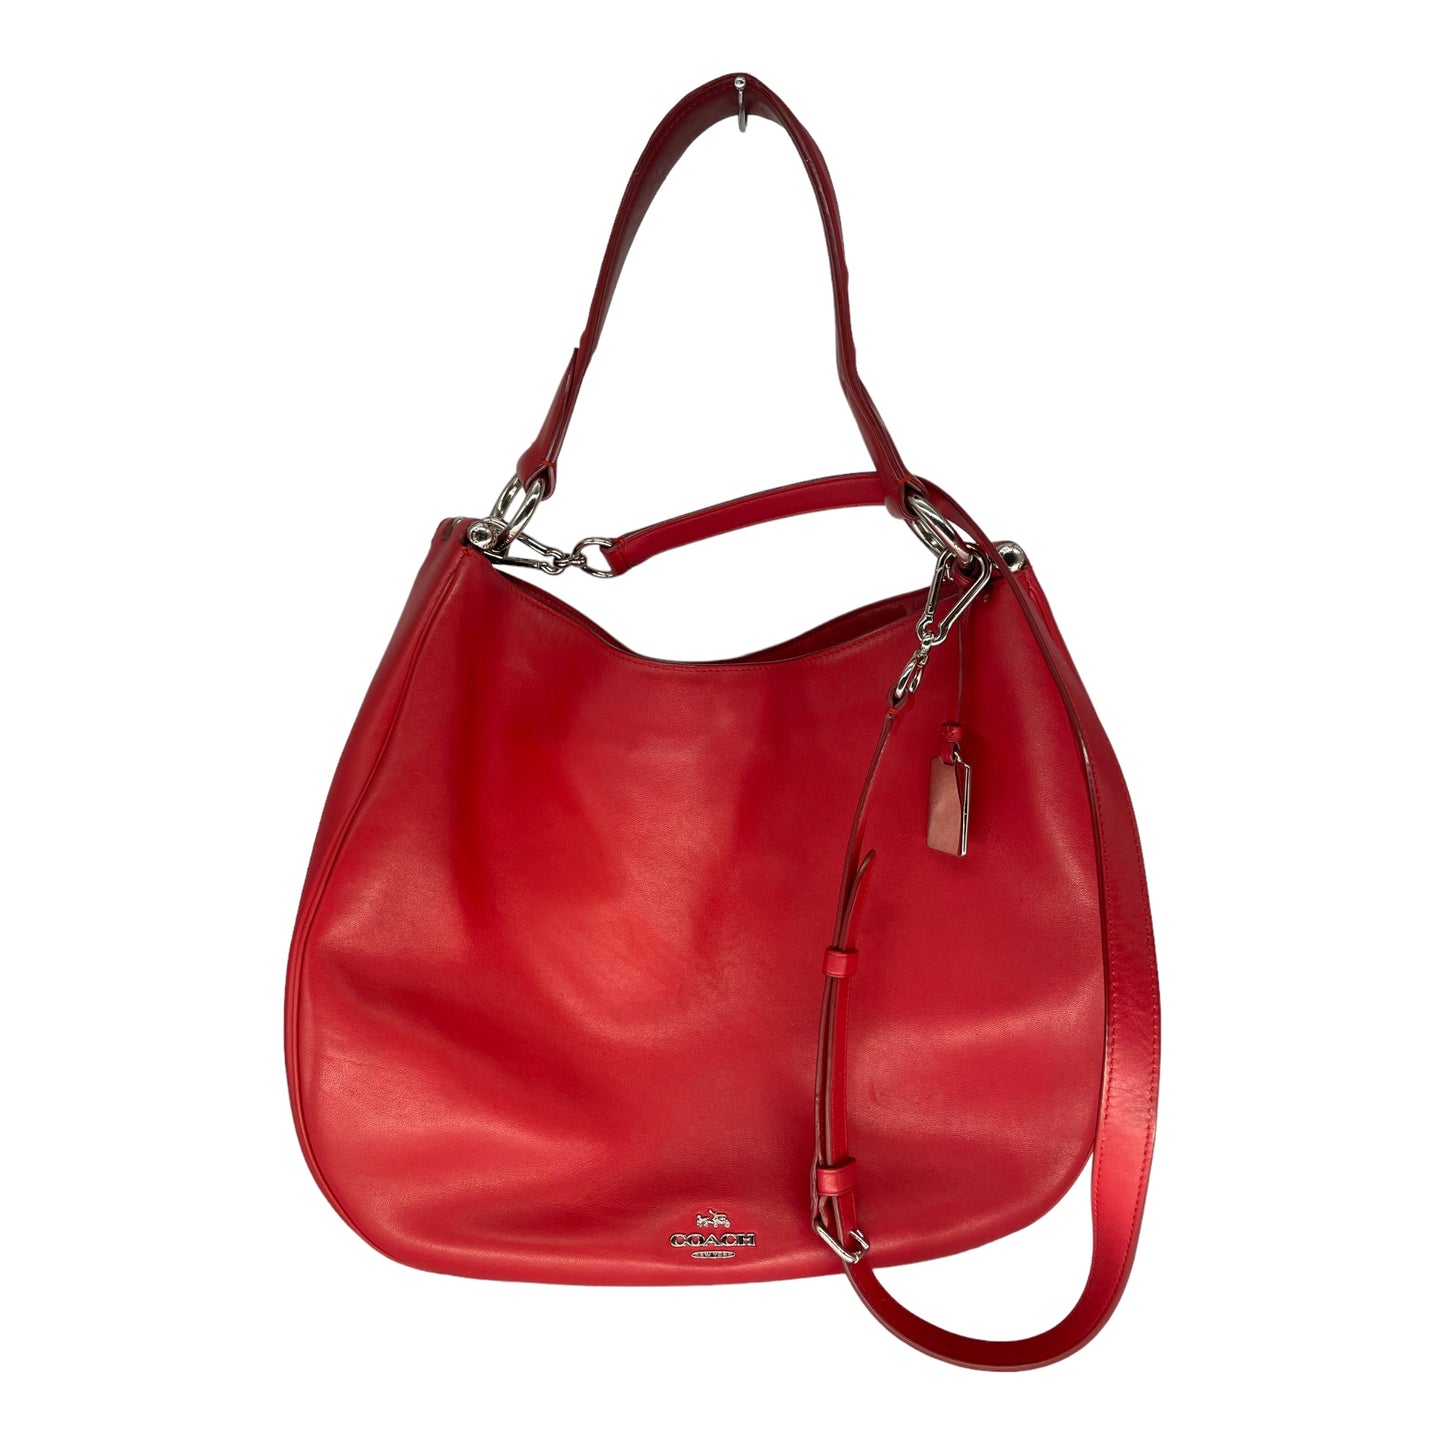 Coach Nomad Hobo/CrossBody Red Glove-Tanned Leather